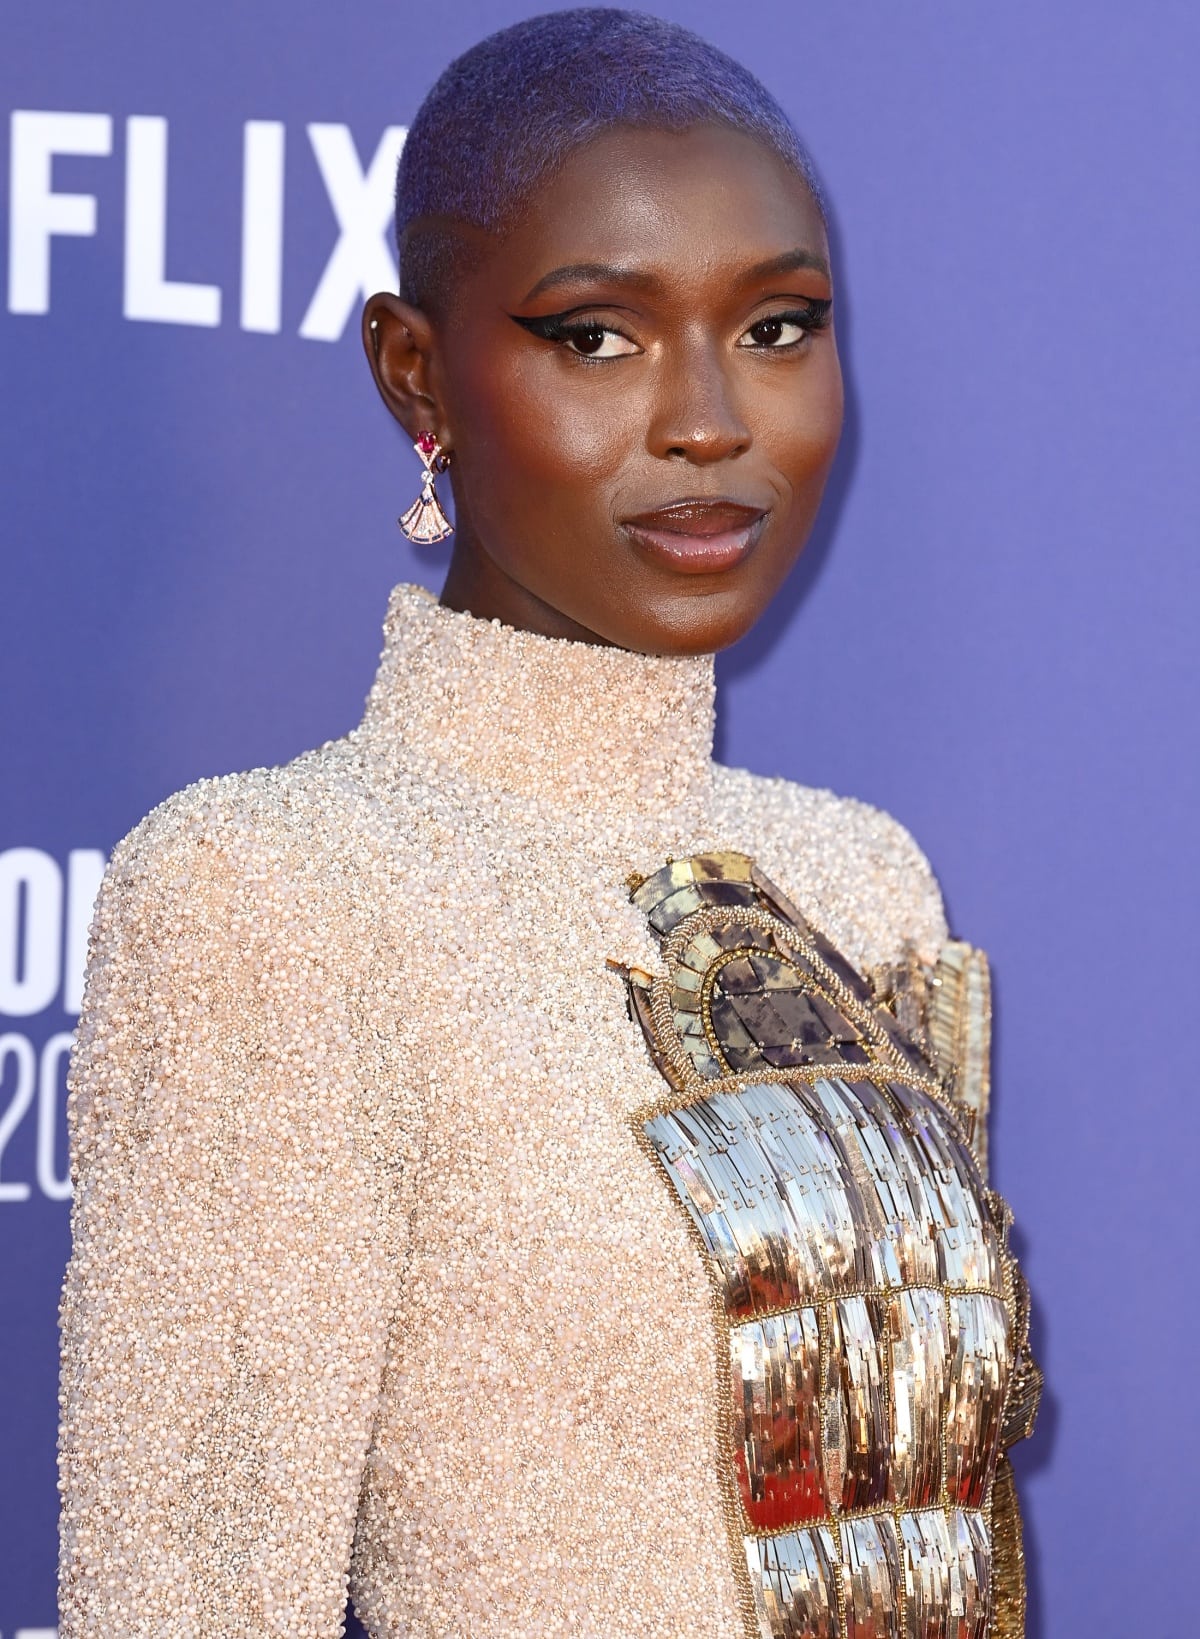 Jodie Turner-Smith styled her look with a purple buzz cut, winged eyeliner, and Bulgari jewels